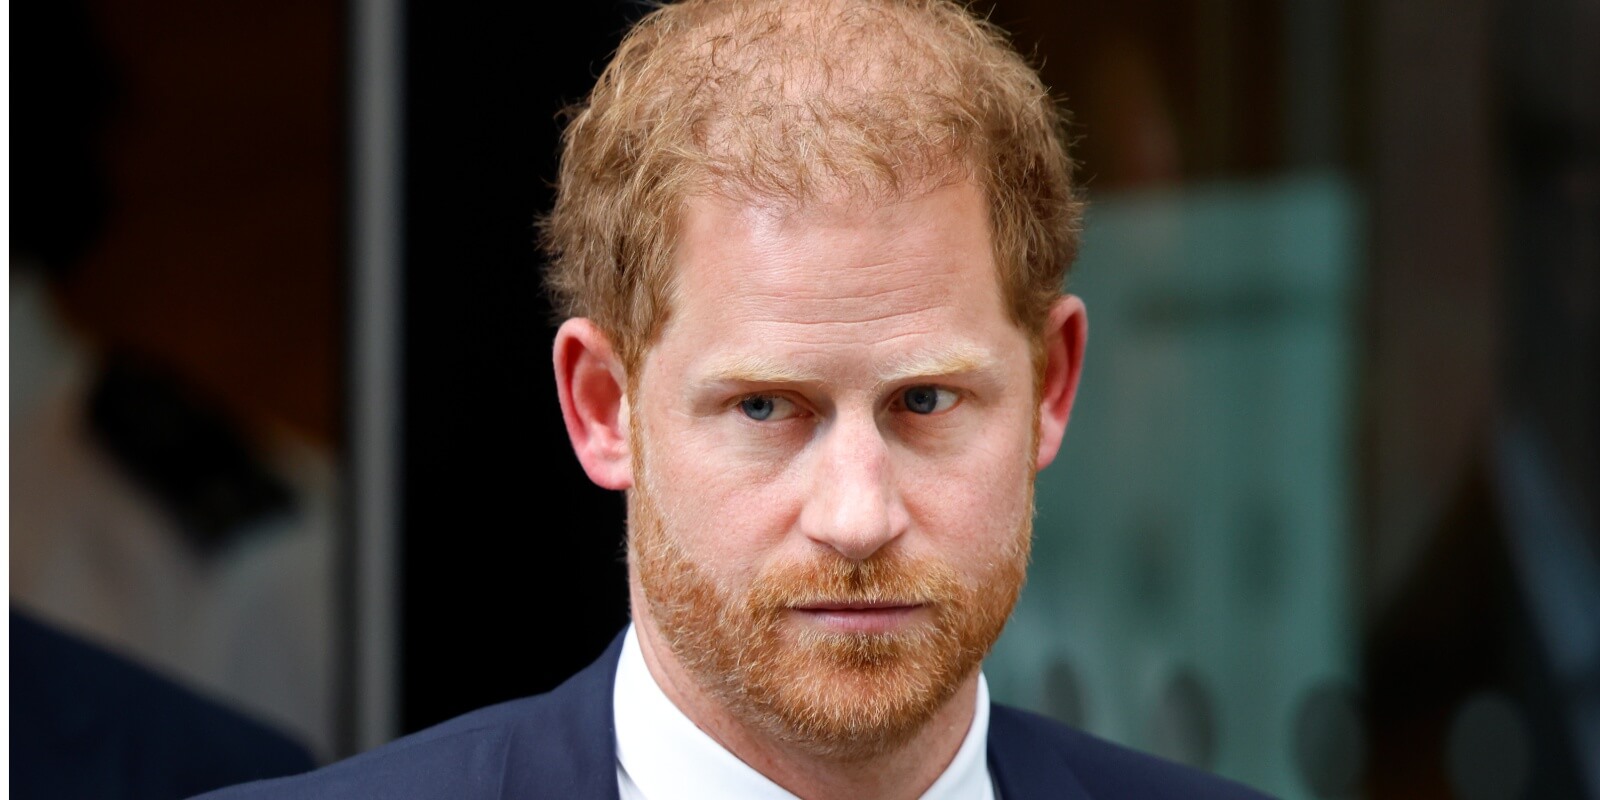 Prince Harry's hair has come under fire after a new photograph shows him with darker and fuller locks.